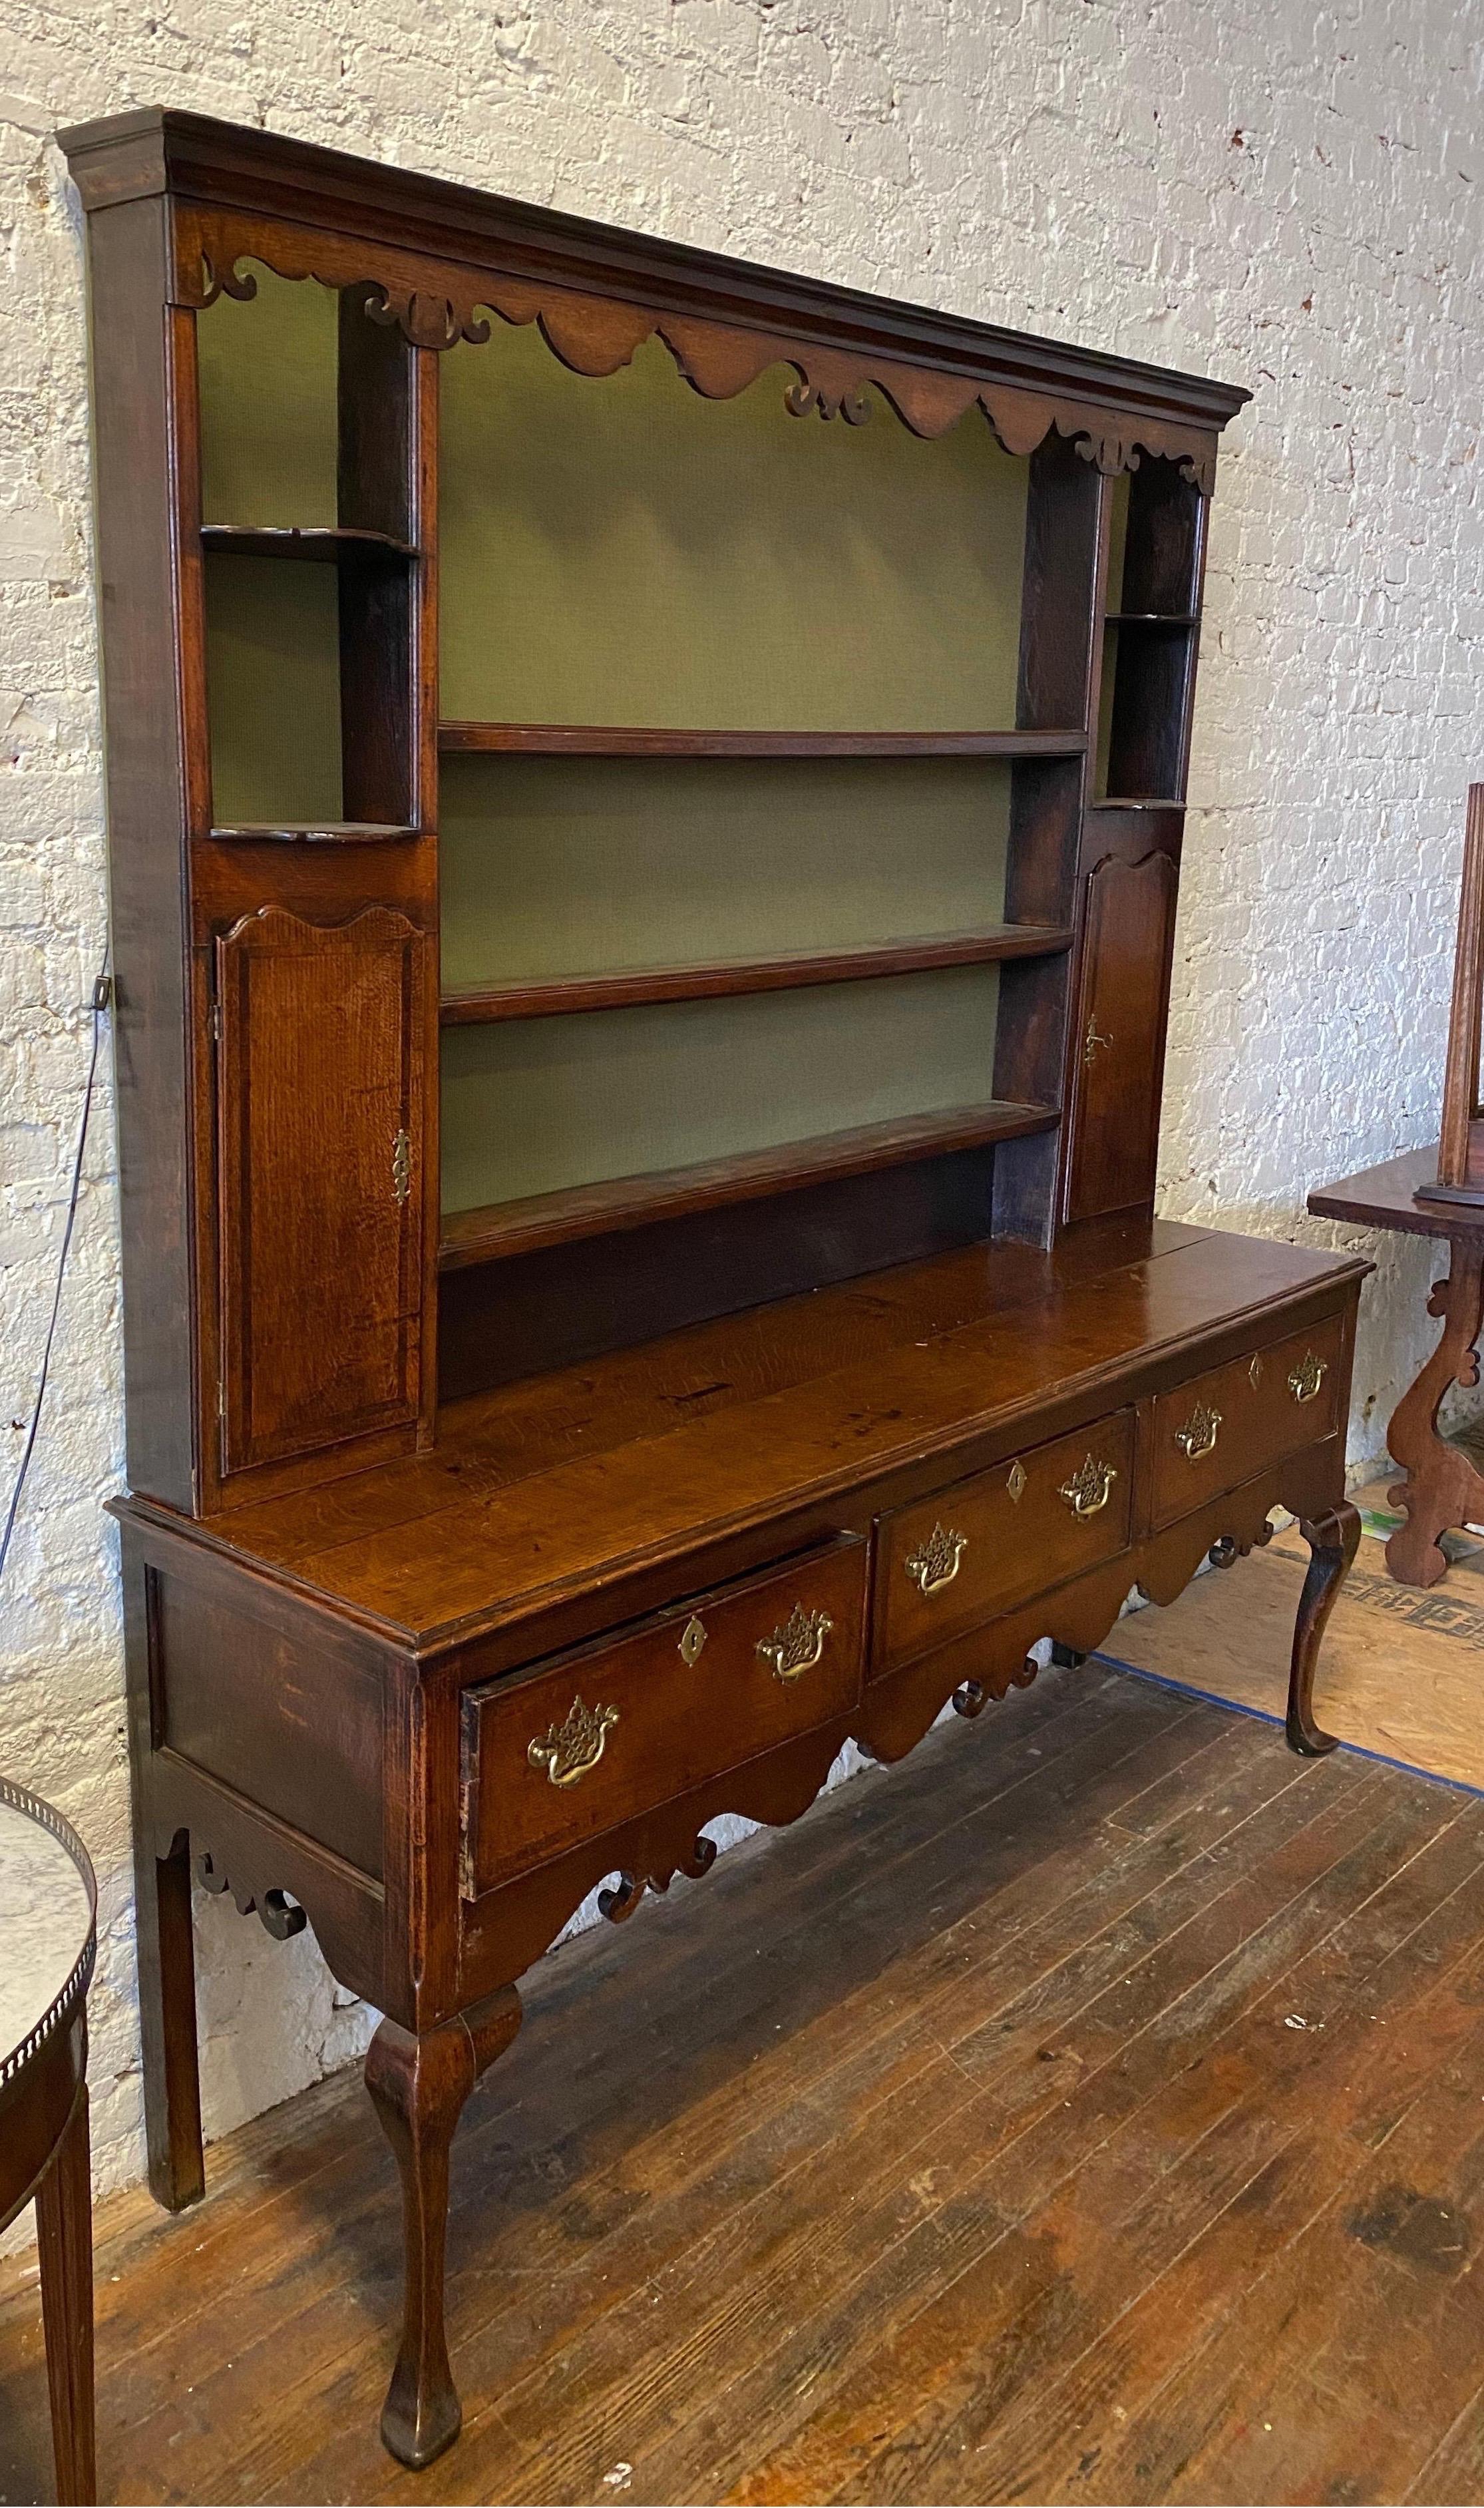 19th century oak welsh cupboard with 3 drawers over a carved apron and cabriole legs. The top rack separates and has matching carvings, two spice cabinets, shelves and has had a very nice green backing and lights added in the crown.